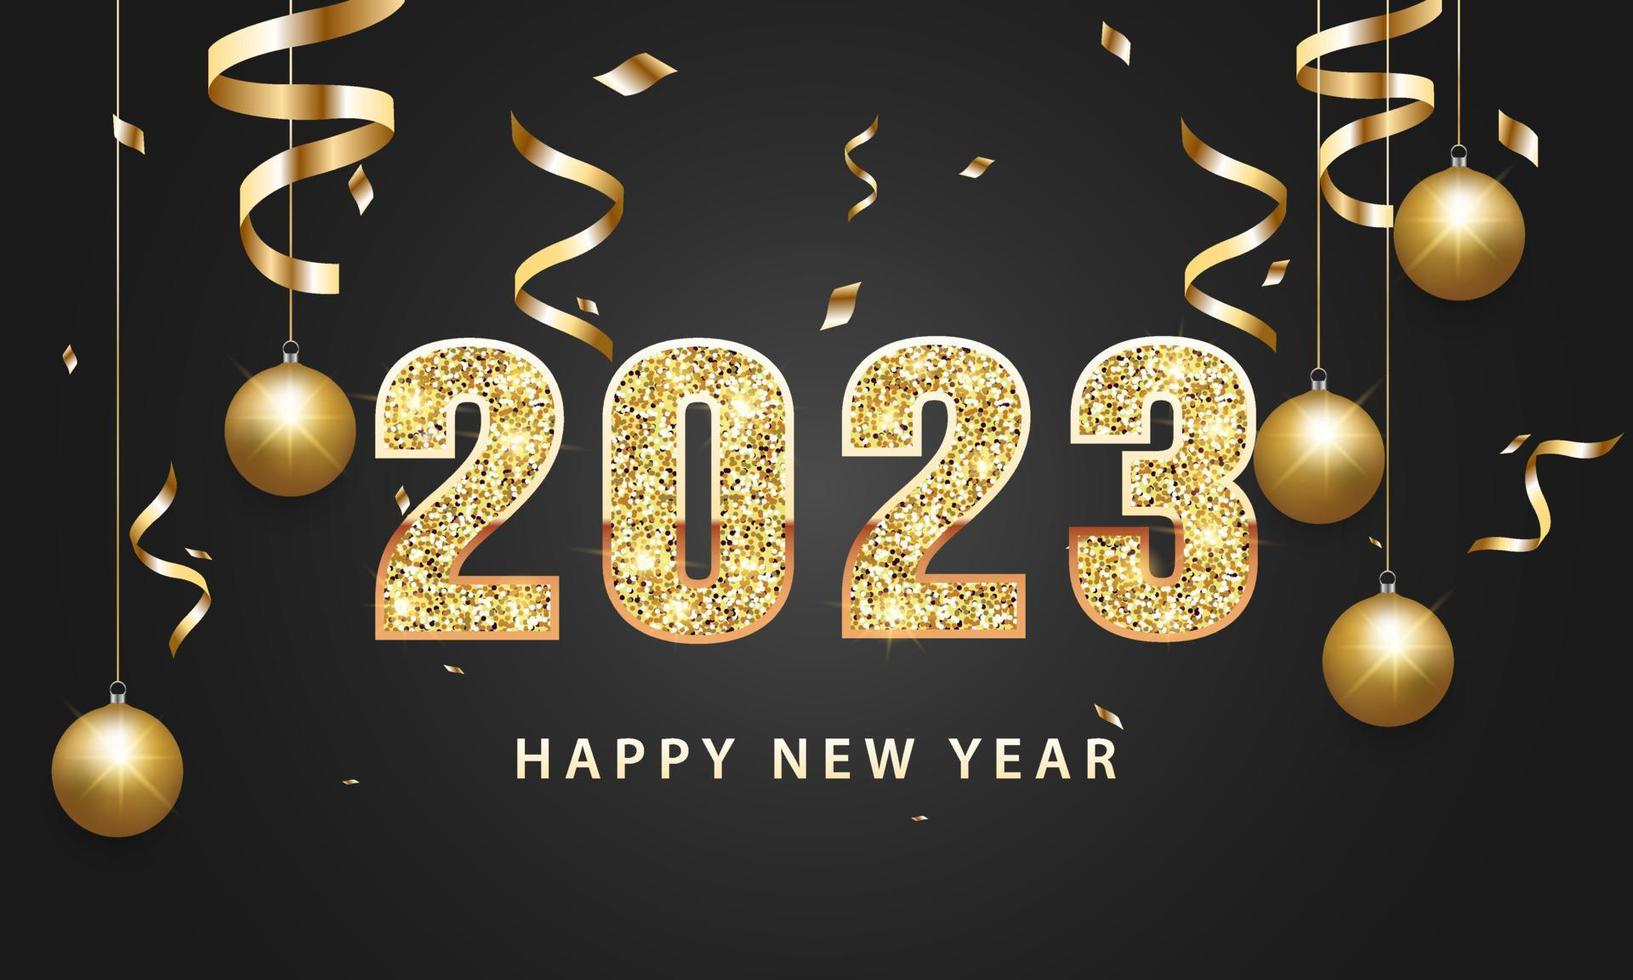 2023-happy-new-year-background-design-greeting-card-banner-poster-illustration-vector